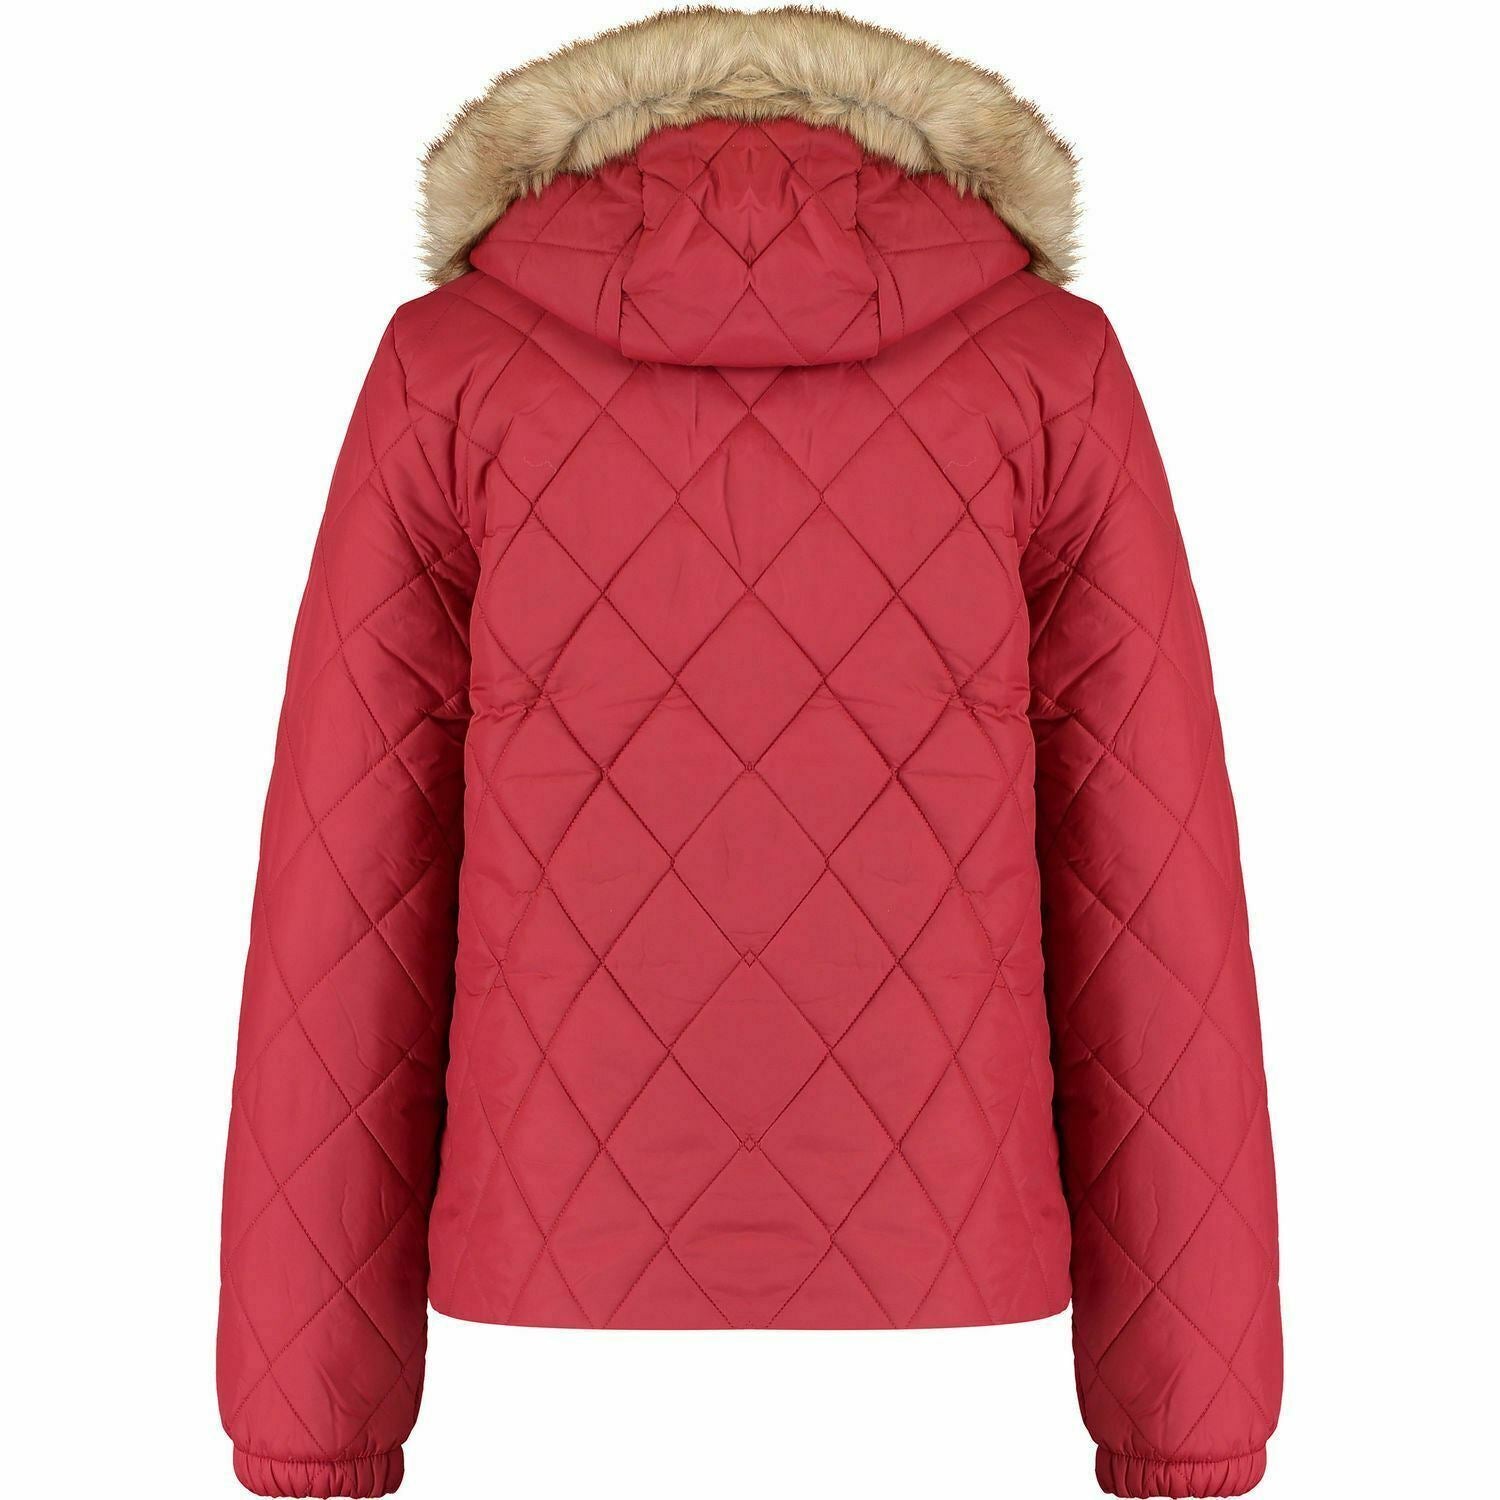 LEVI'S Women's Red Quilted Padded Jacket, size XS